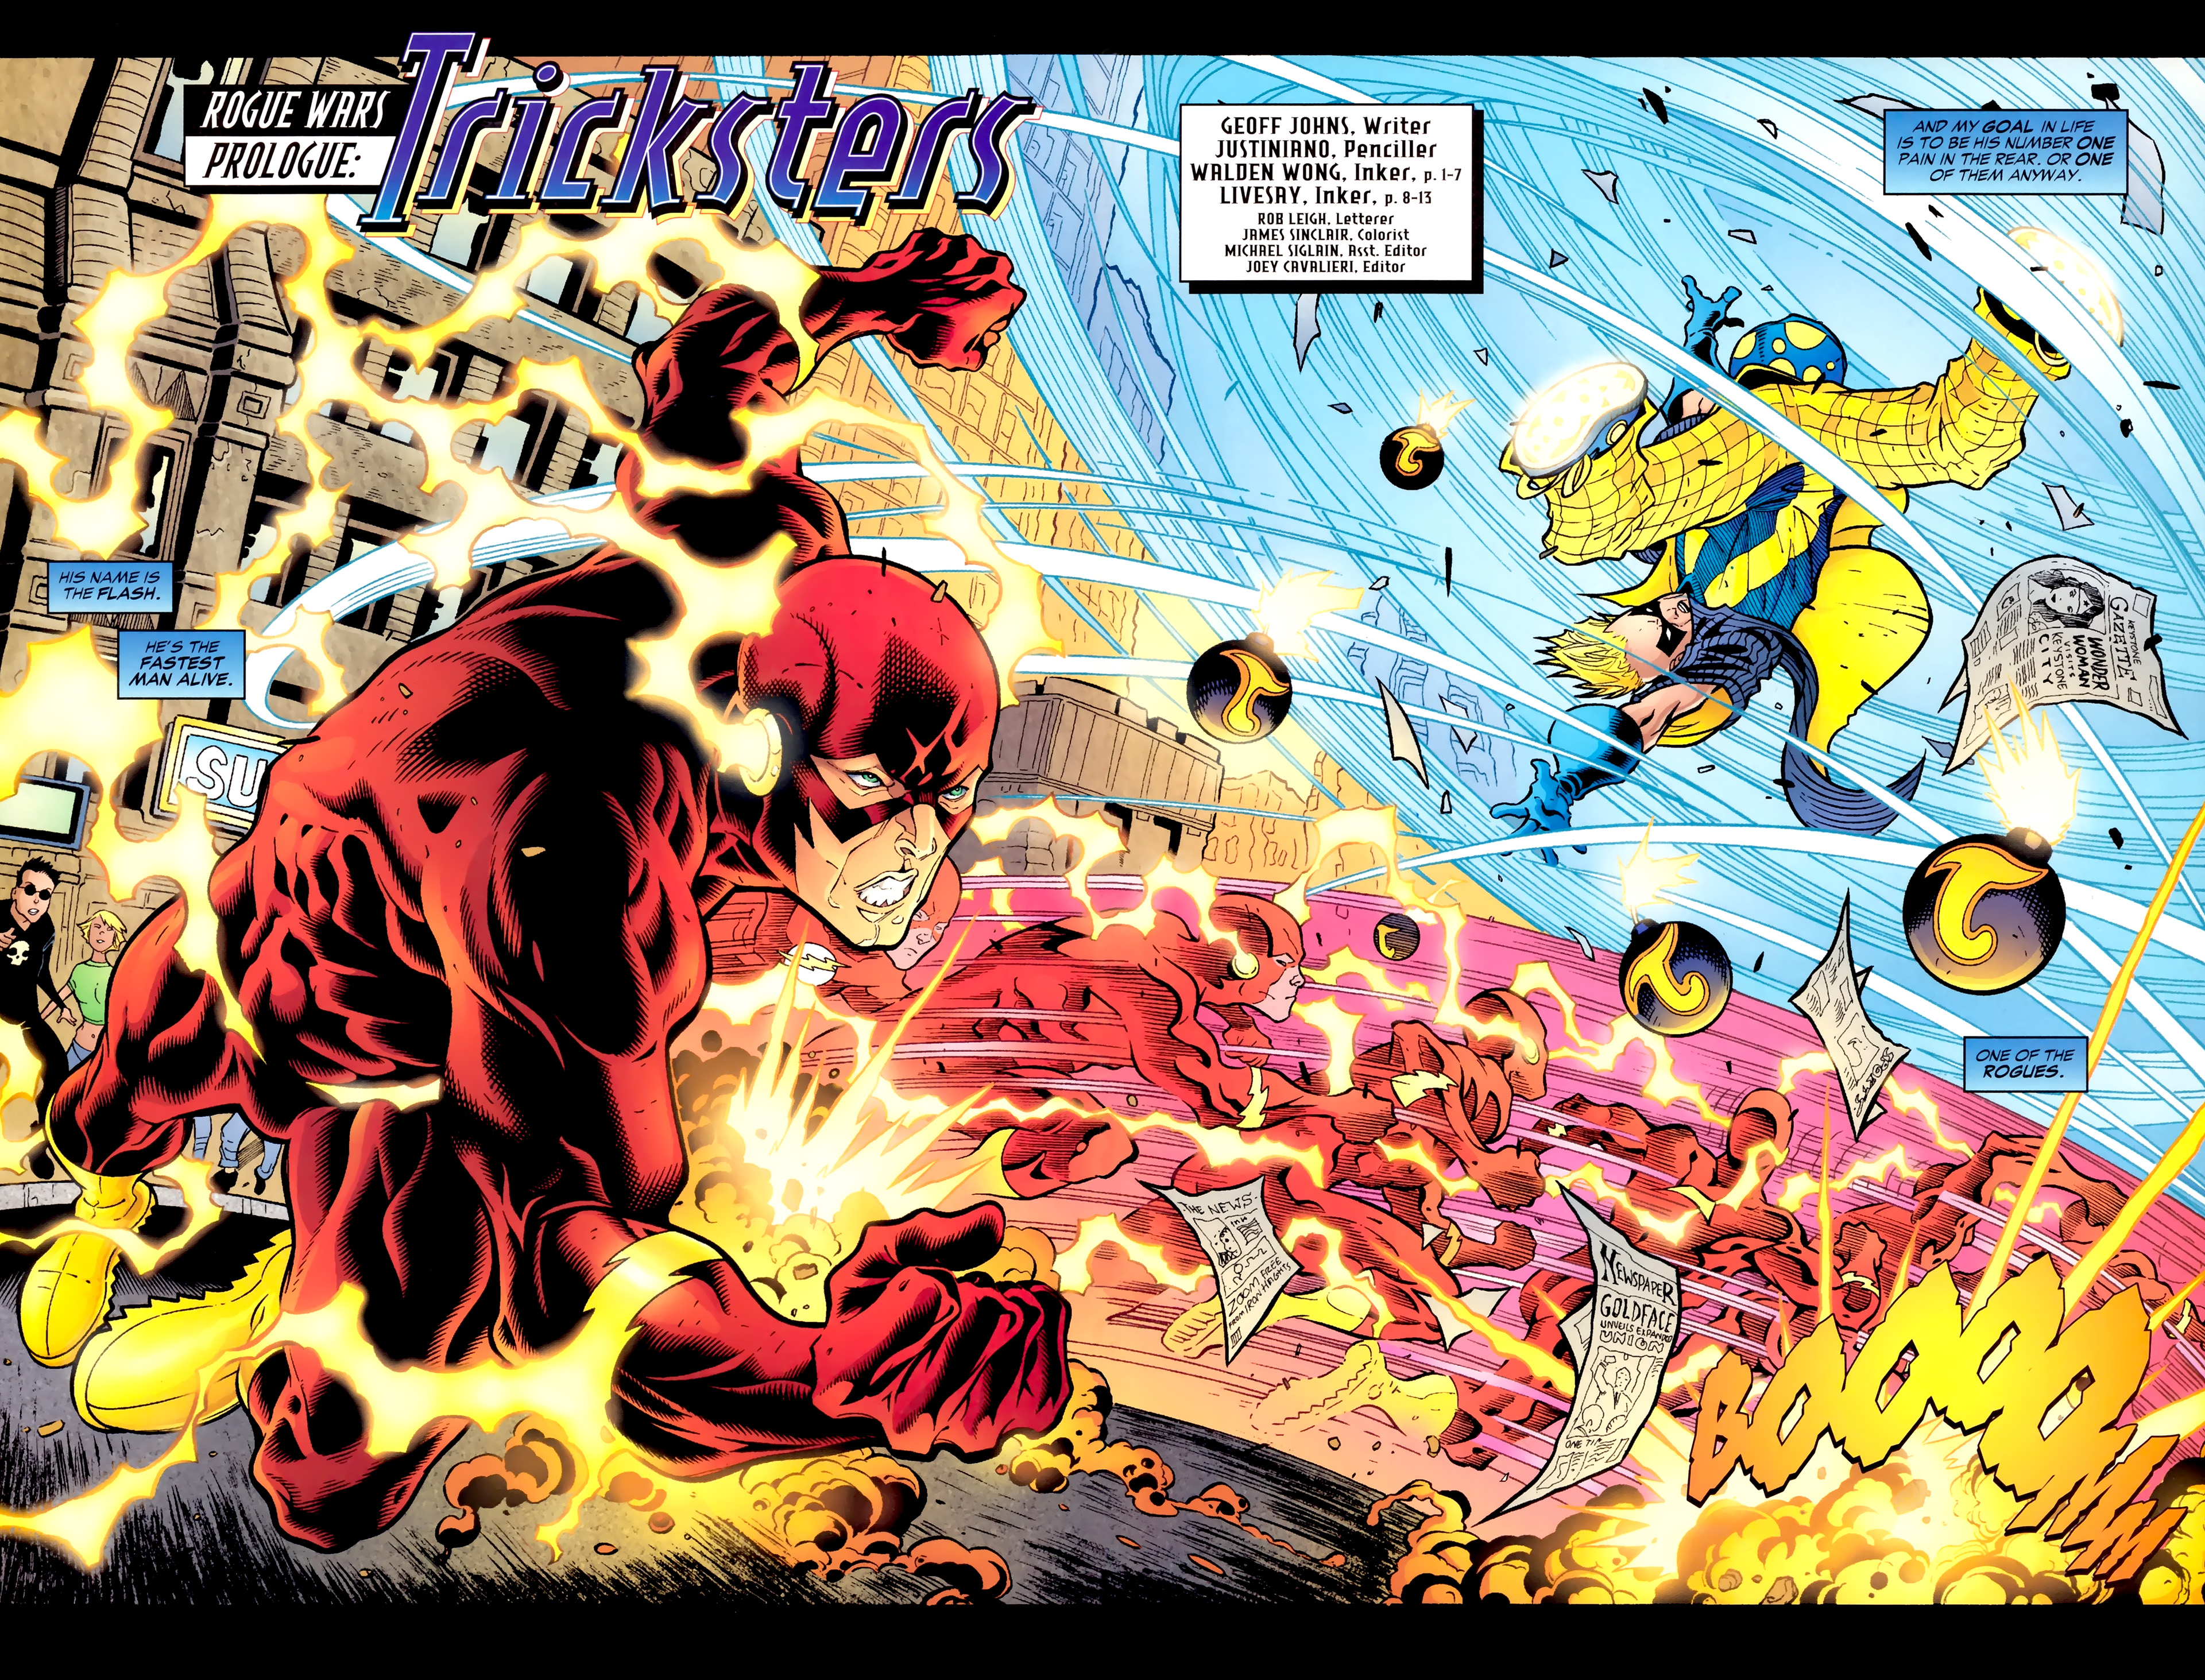 Read online The Flash (1987) comic -  Issue # _Extra 1/2 - Rogue War Prologue: Tricksters - 4